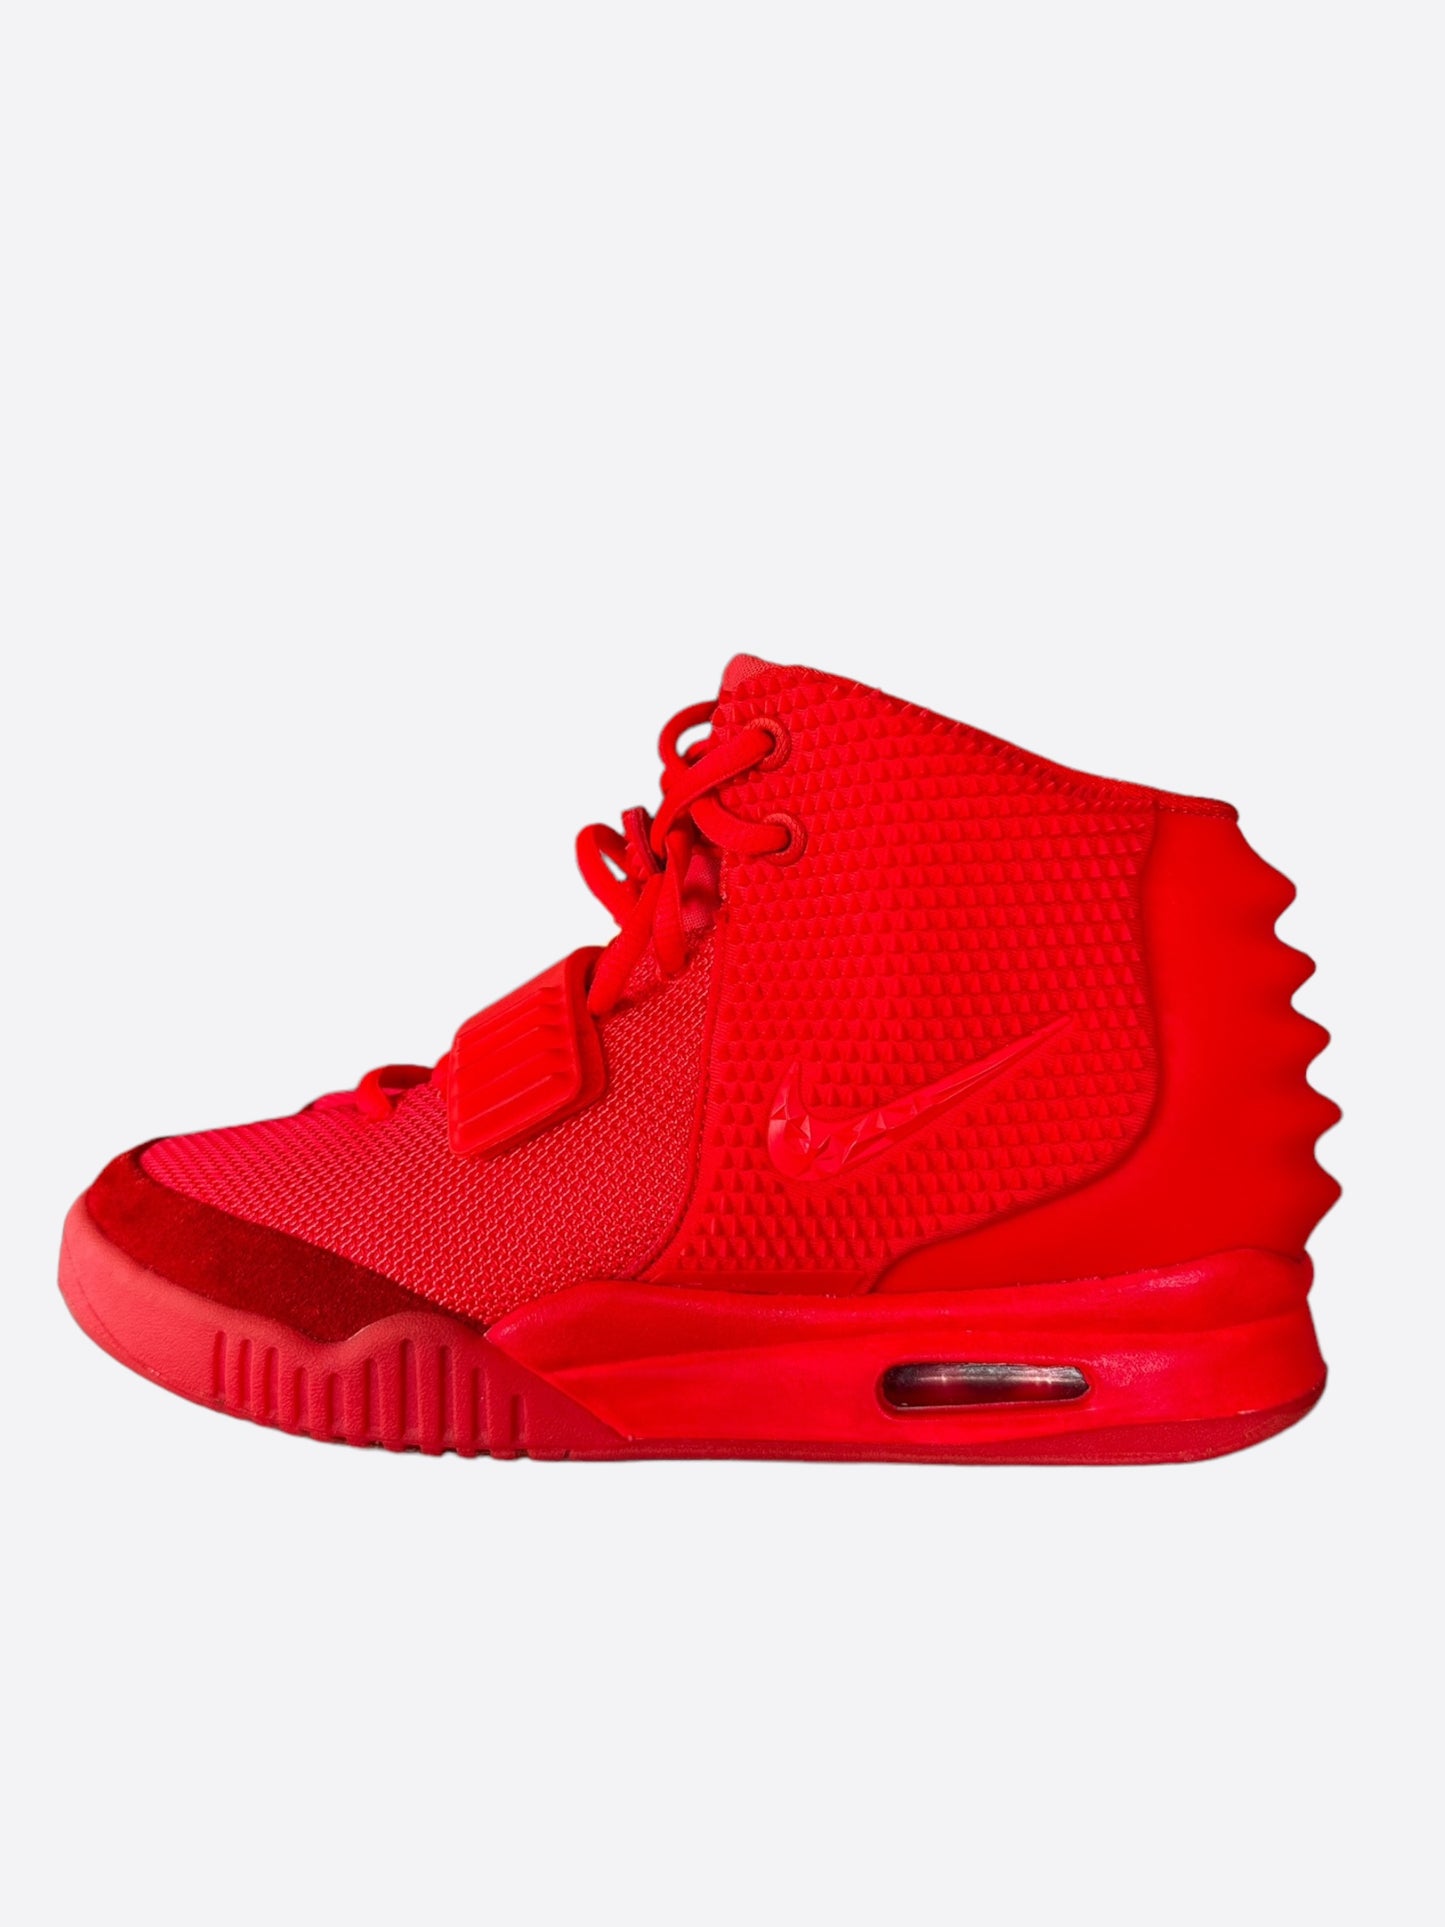 Nike Red October Air Yeezy 2